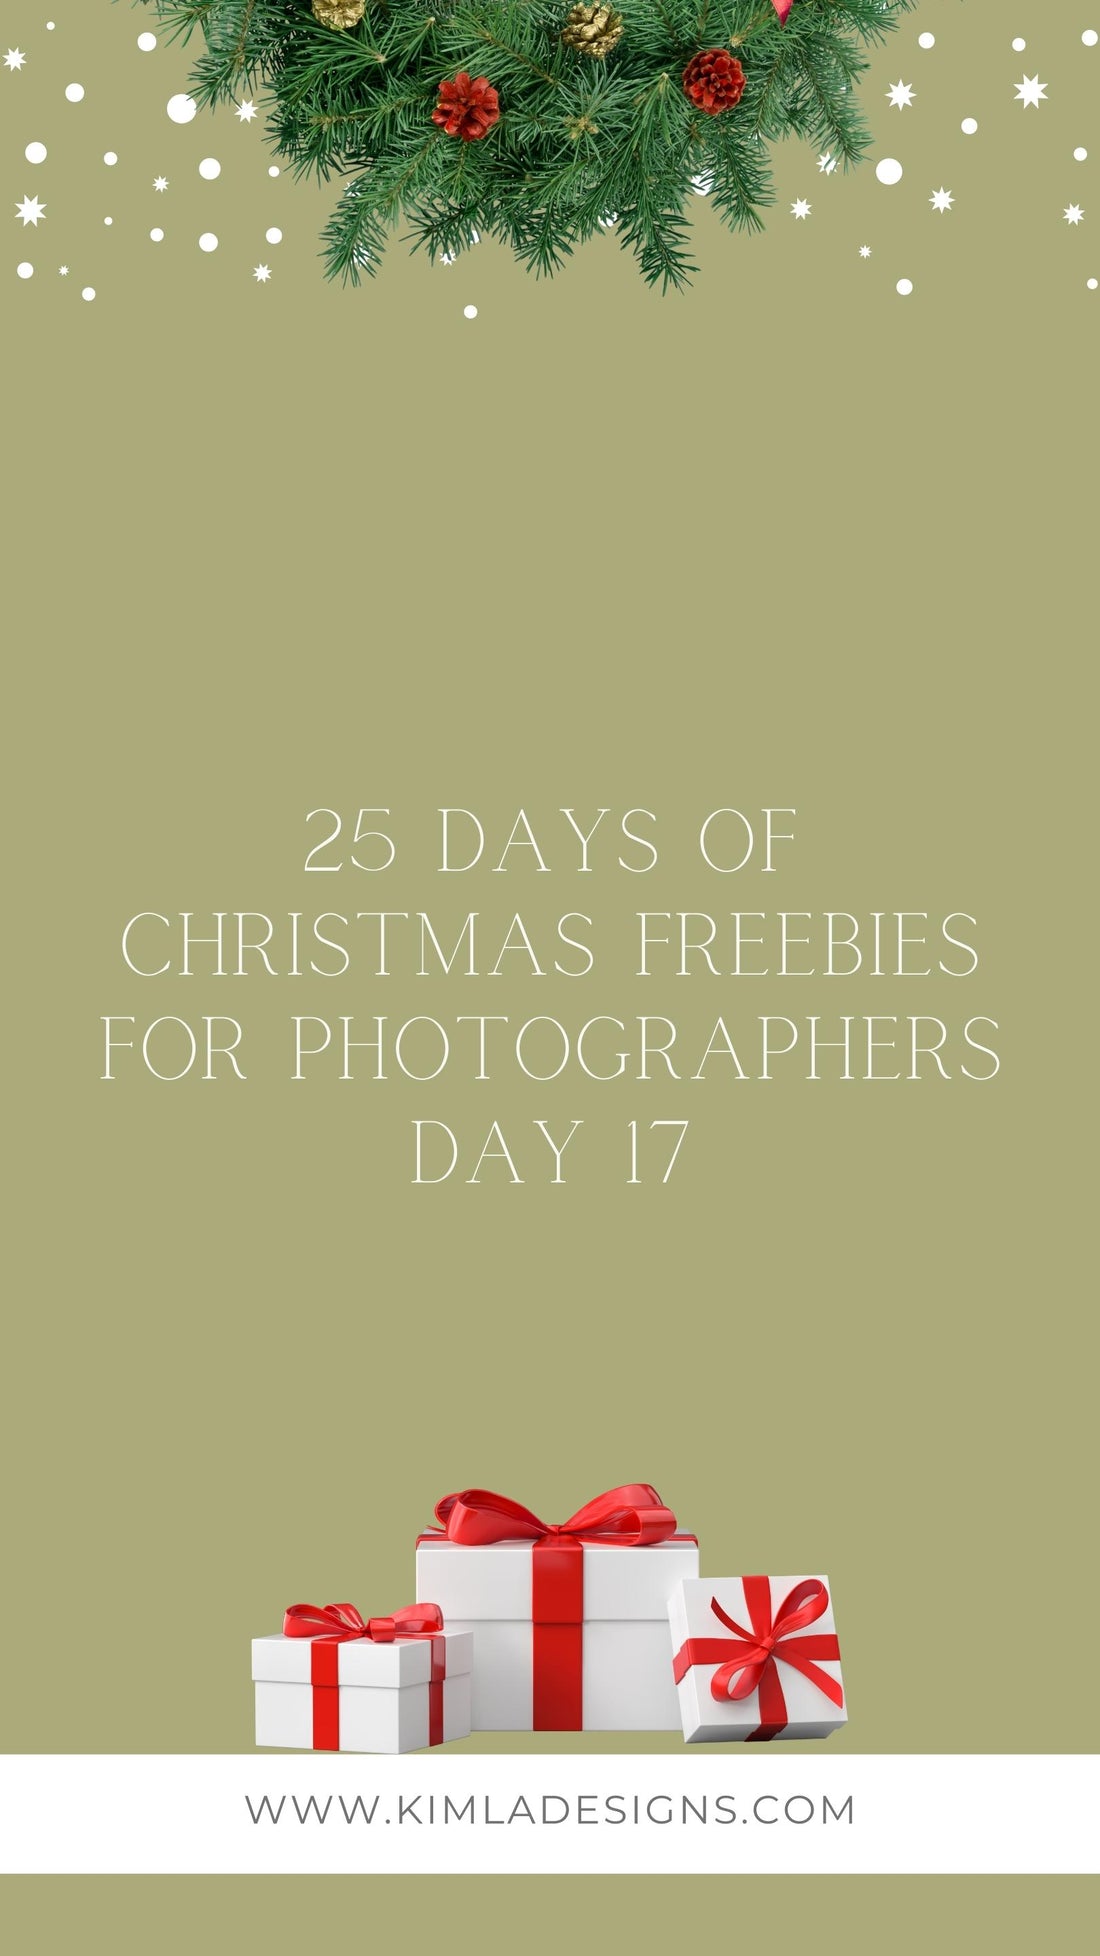 25 Days of Christmas Freebies Day 17th